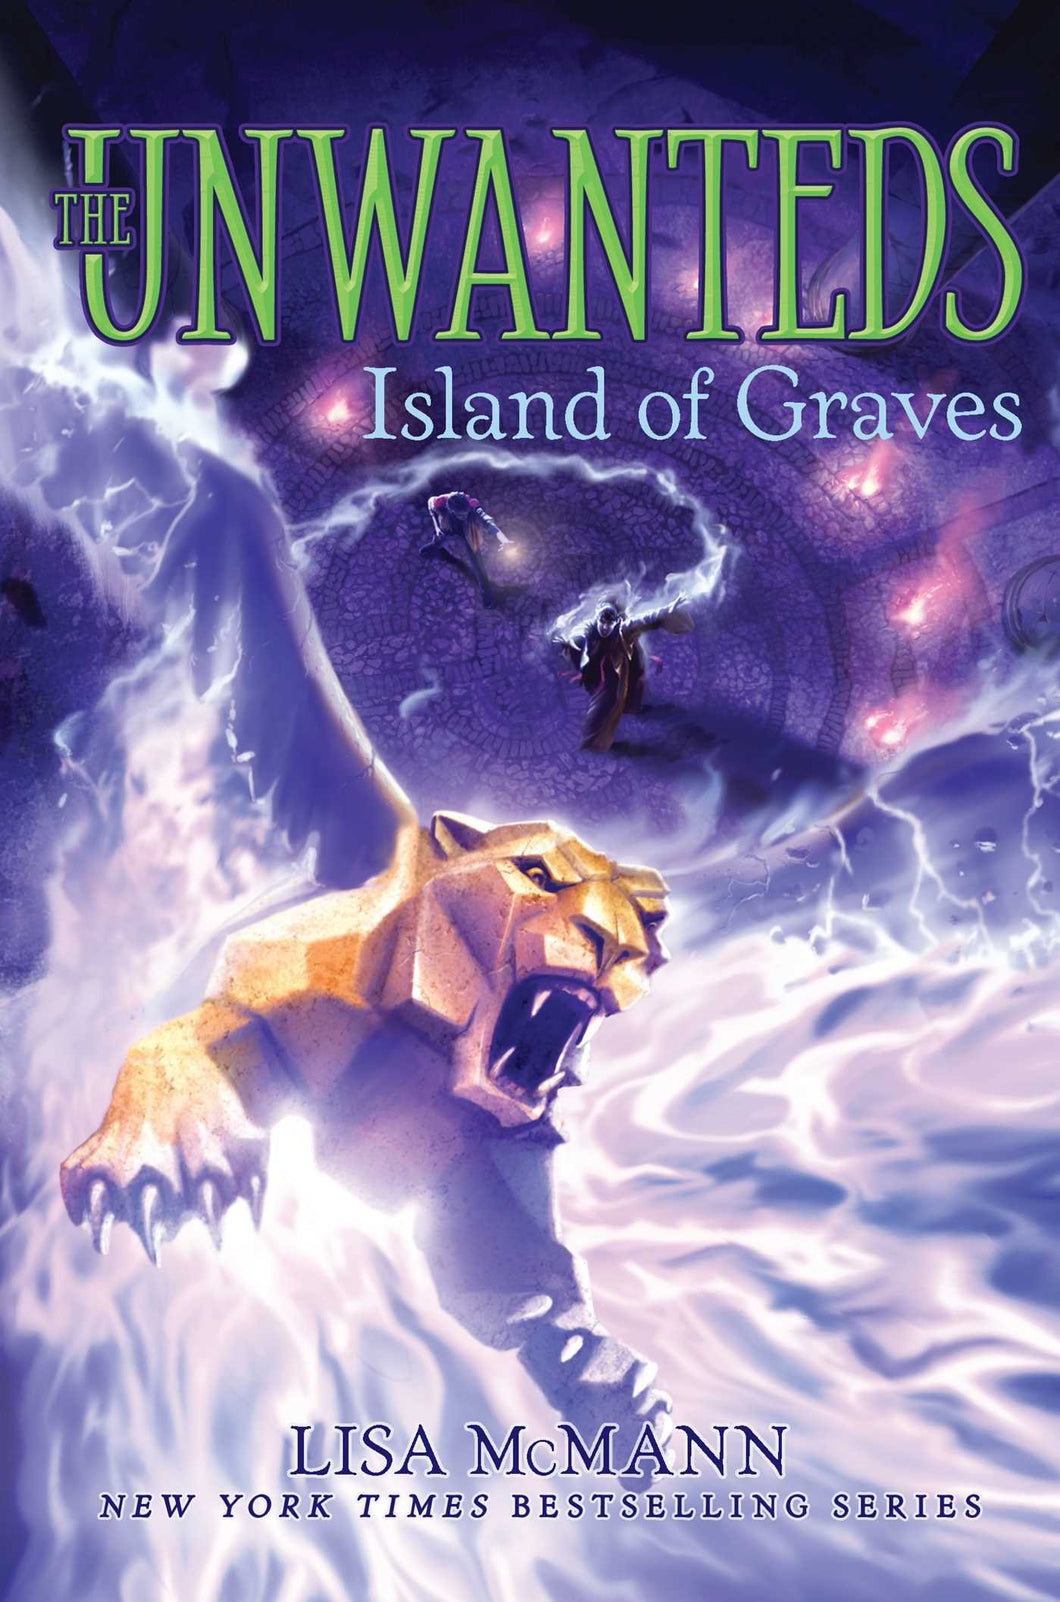 Island of Graves (The Unwanteds Book 6)